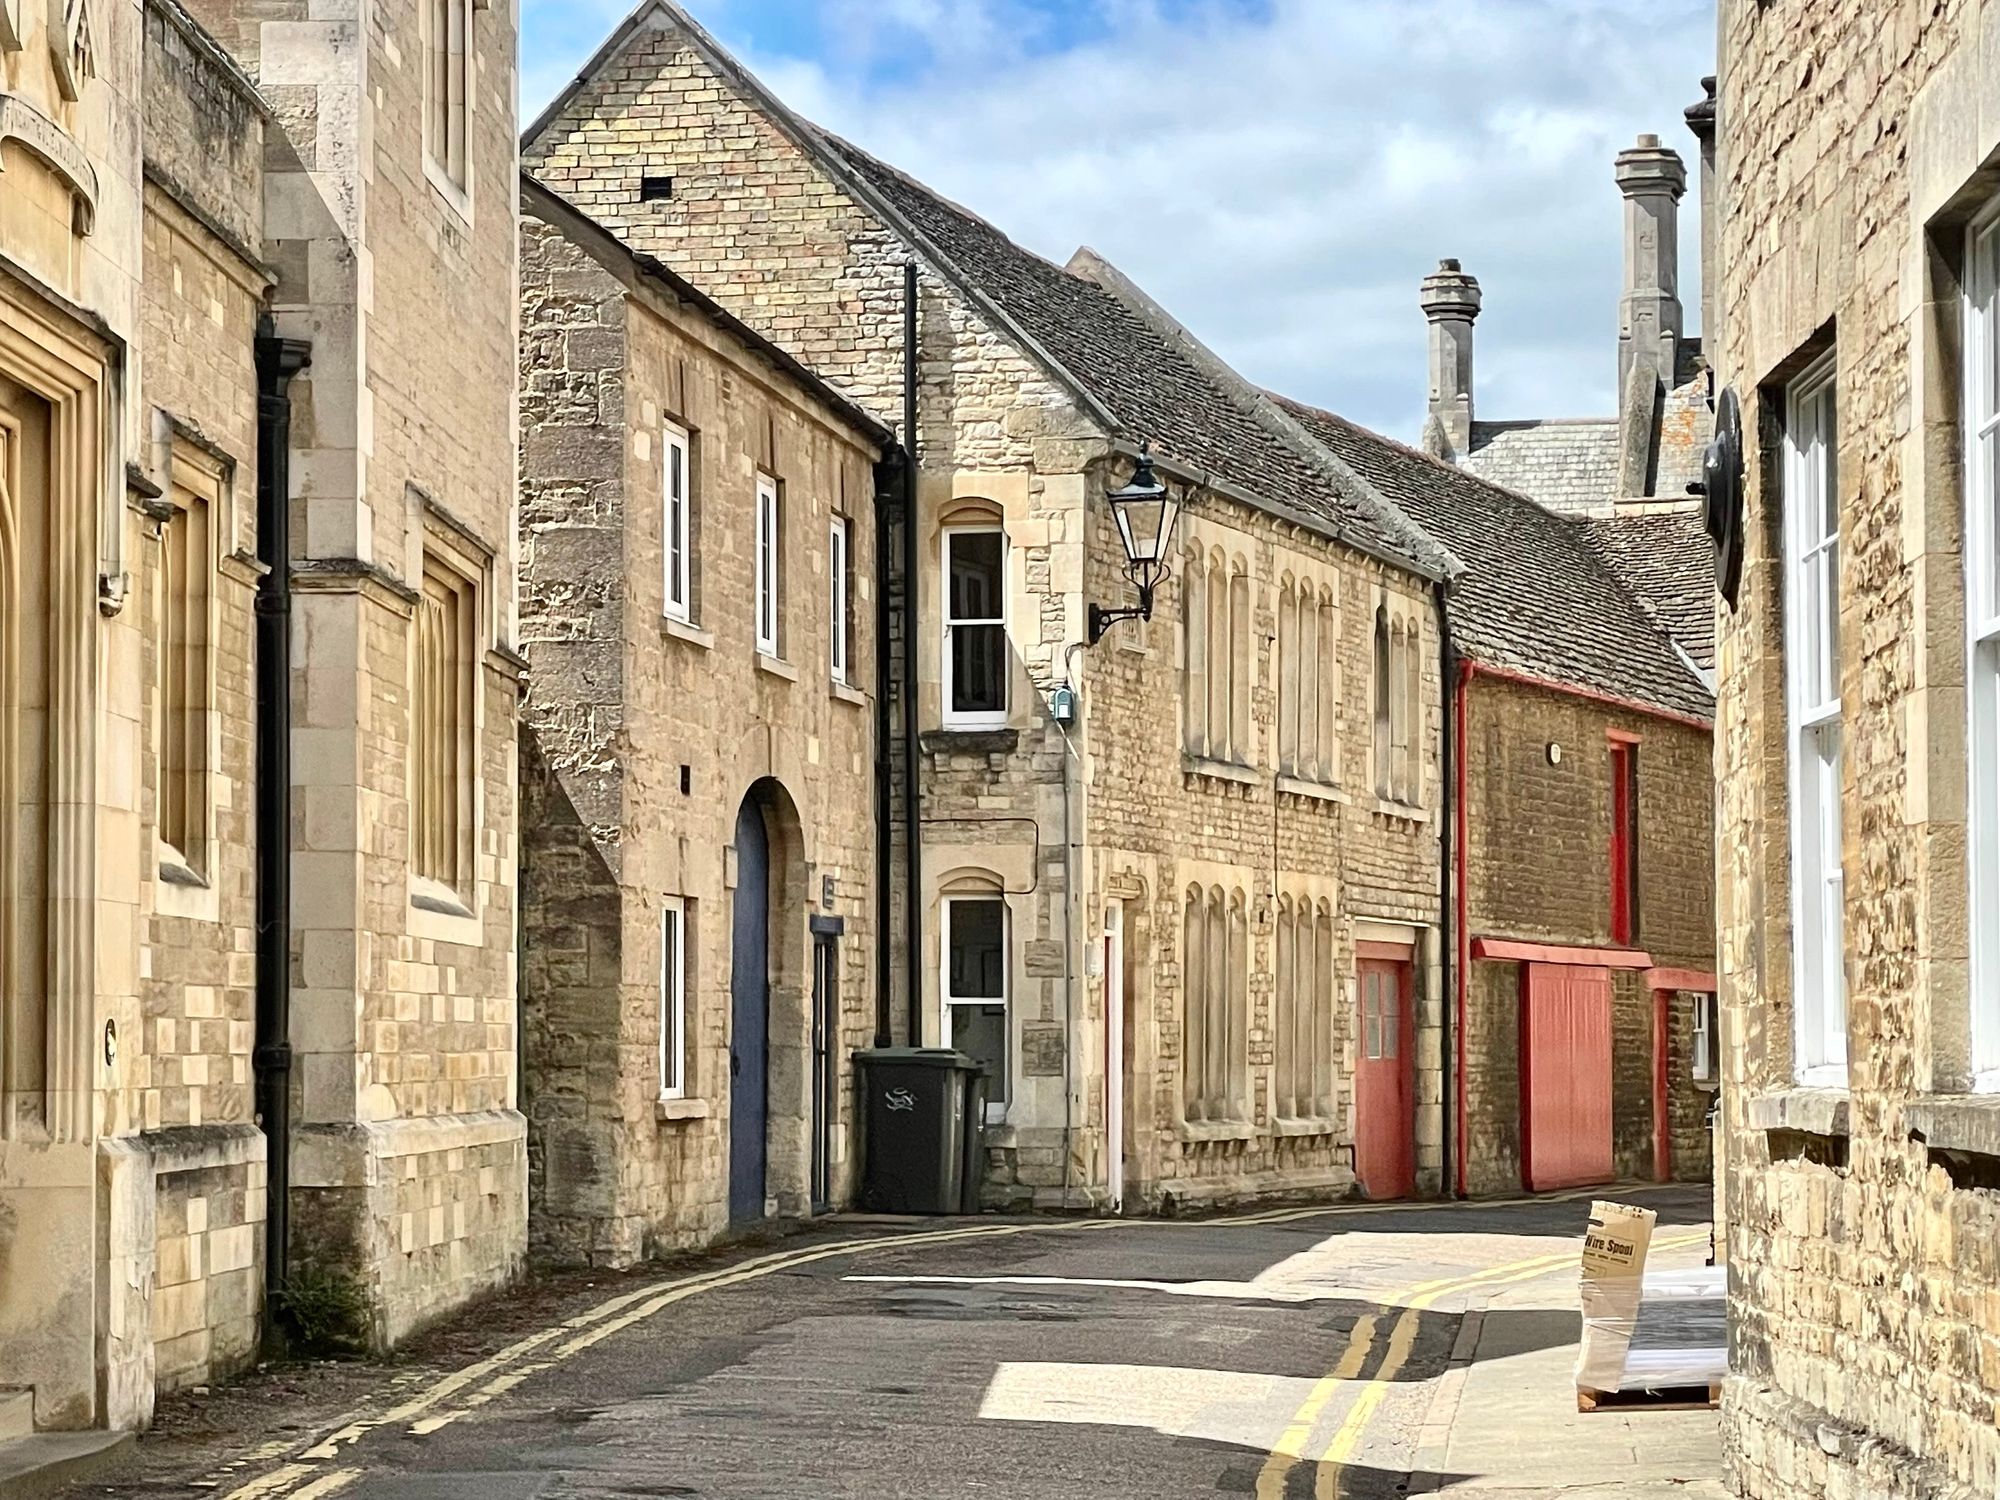 A scroll through the buildings of Oundle, Northamptonshire